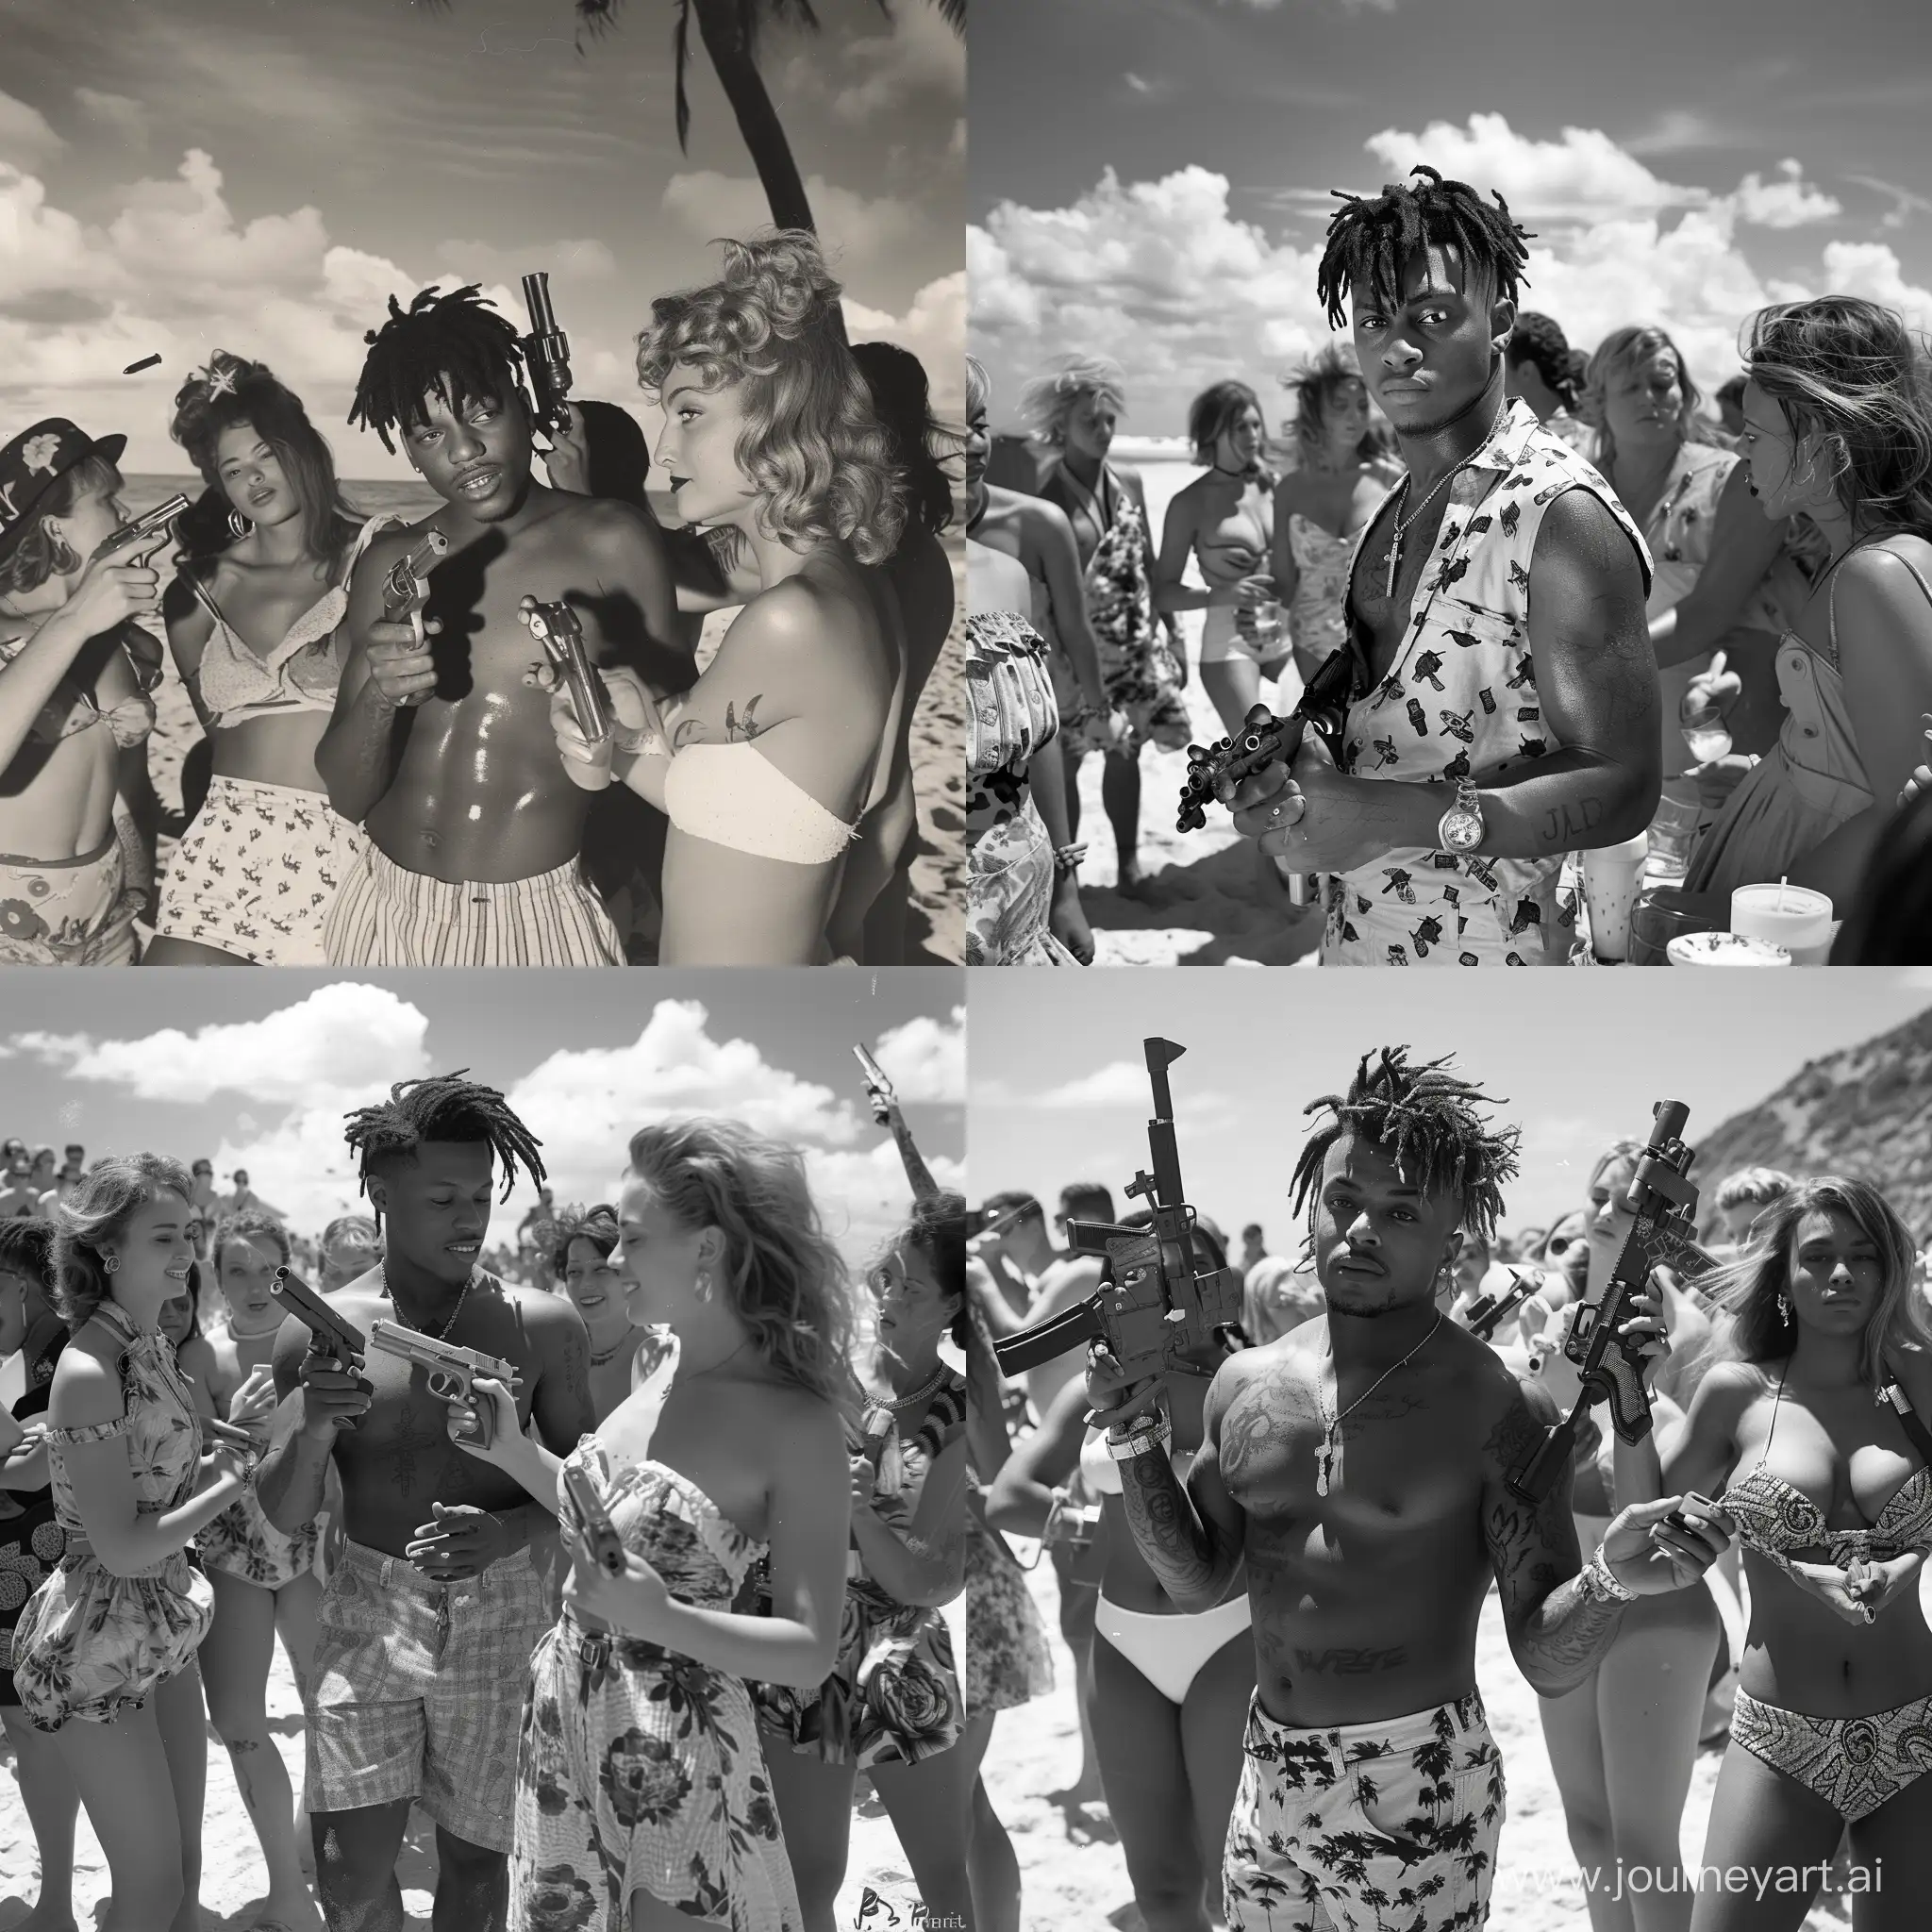 A 1950s Black and White Photograph,of Juice WRLD holding Guns,At the beach,With Women.